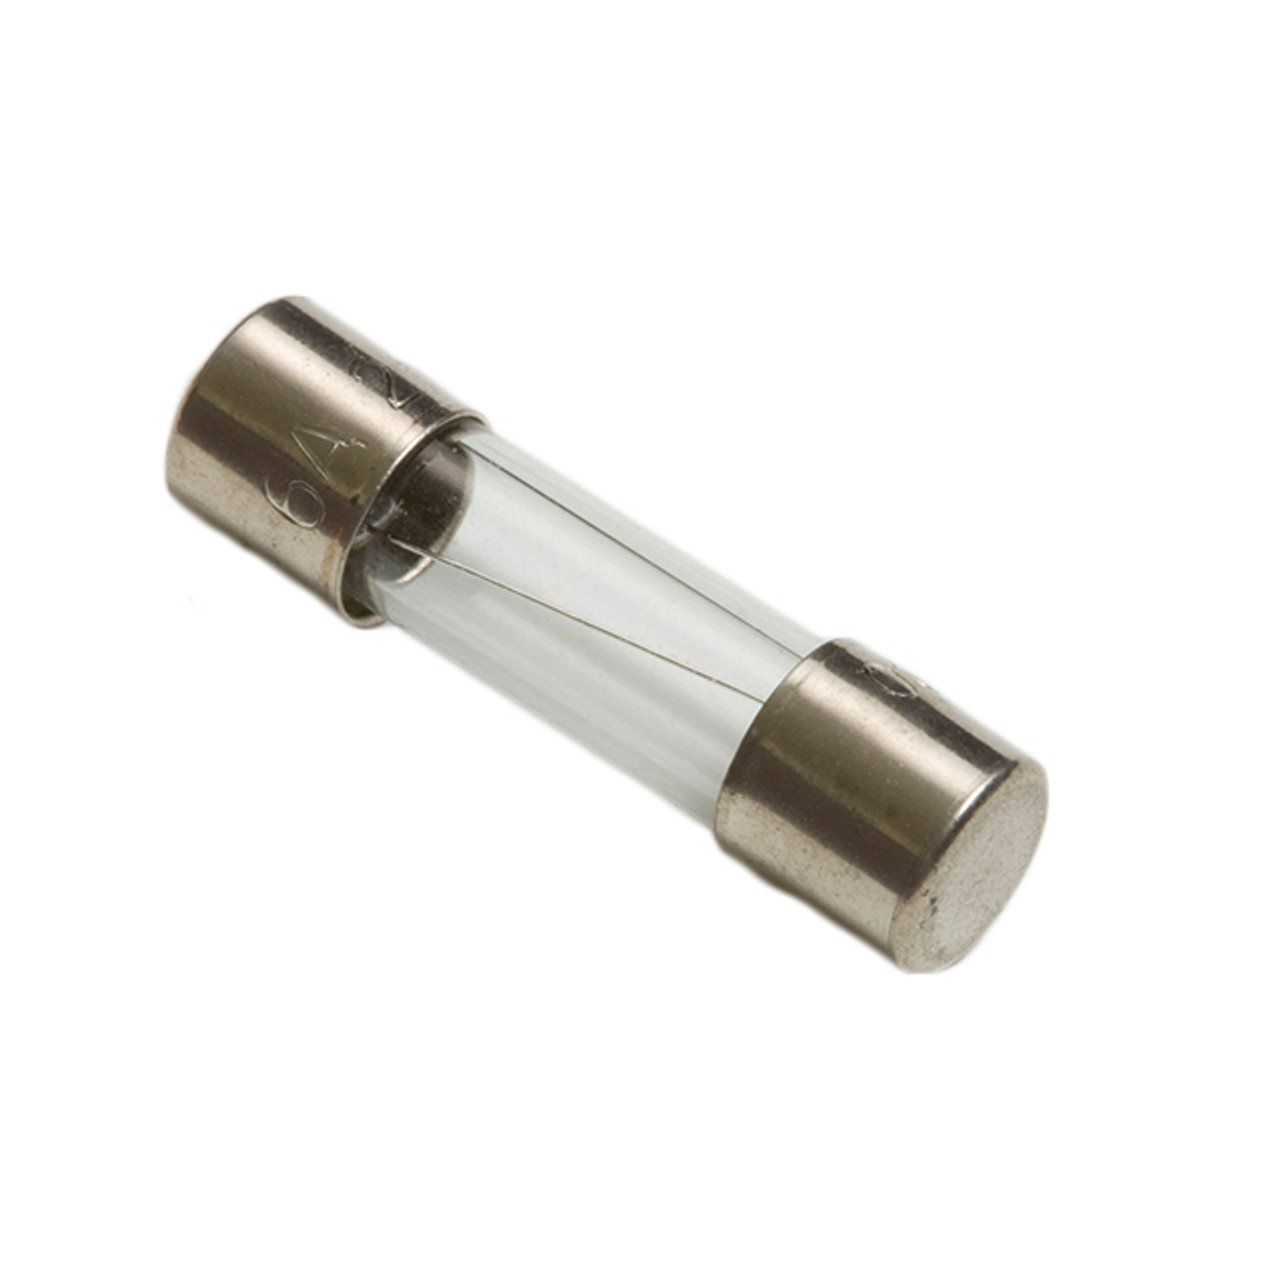 OptiFuse FSX-500mA Glass Body - Fast Acting Fuses